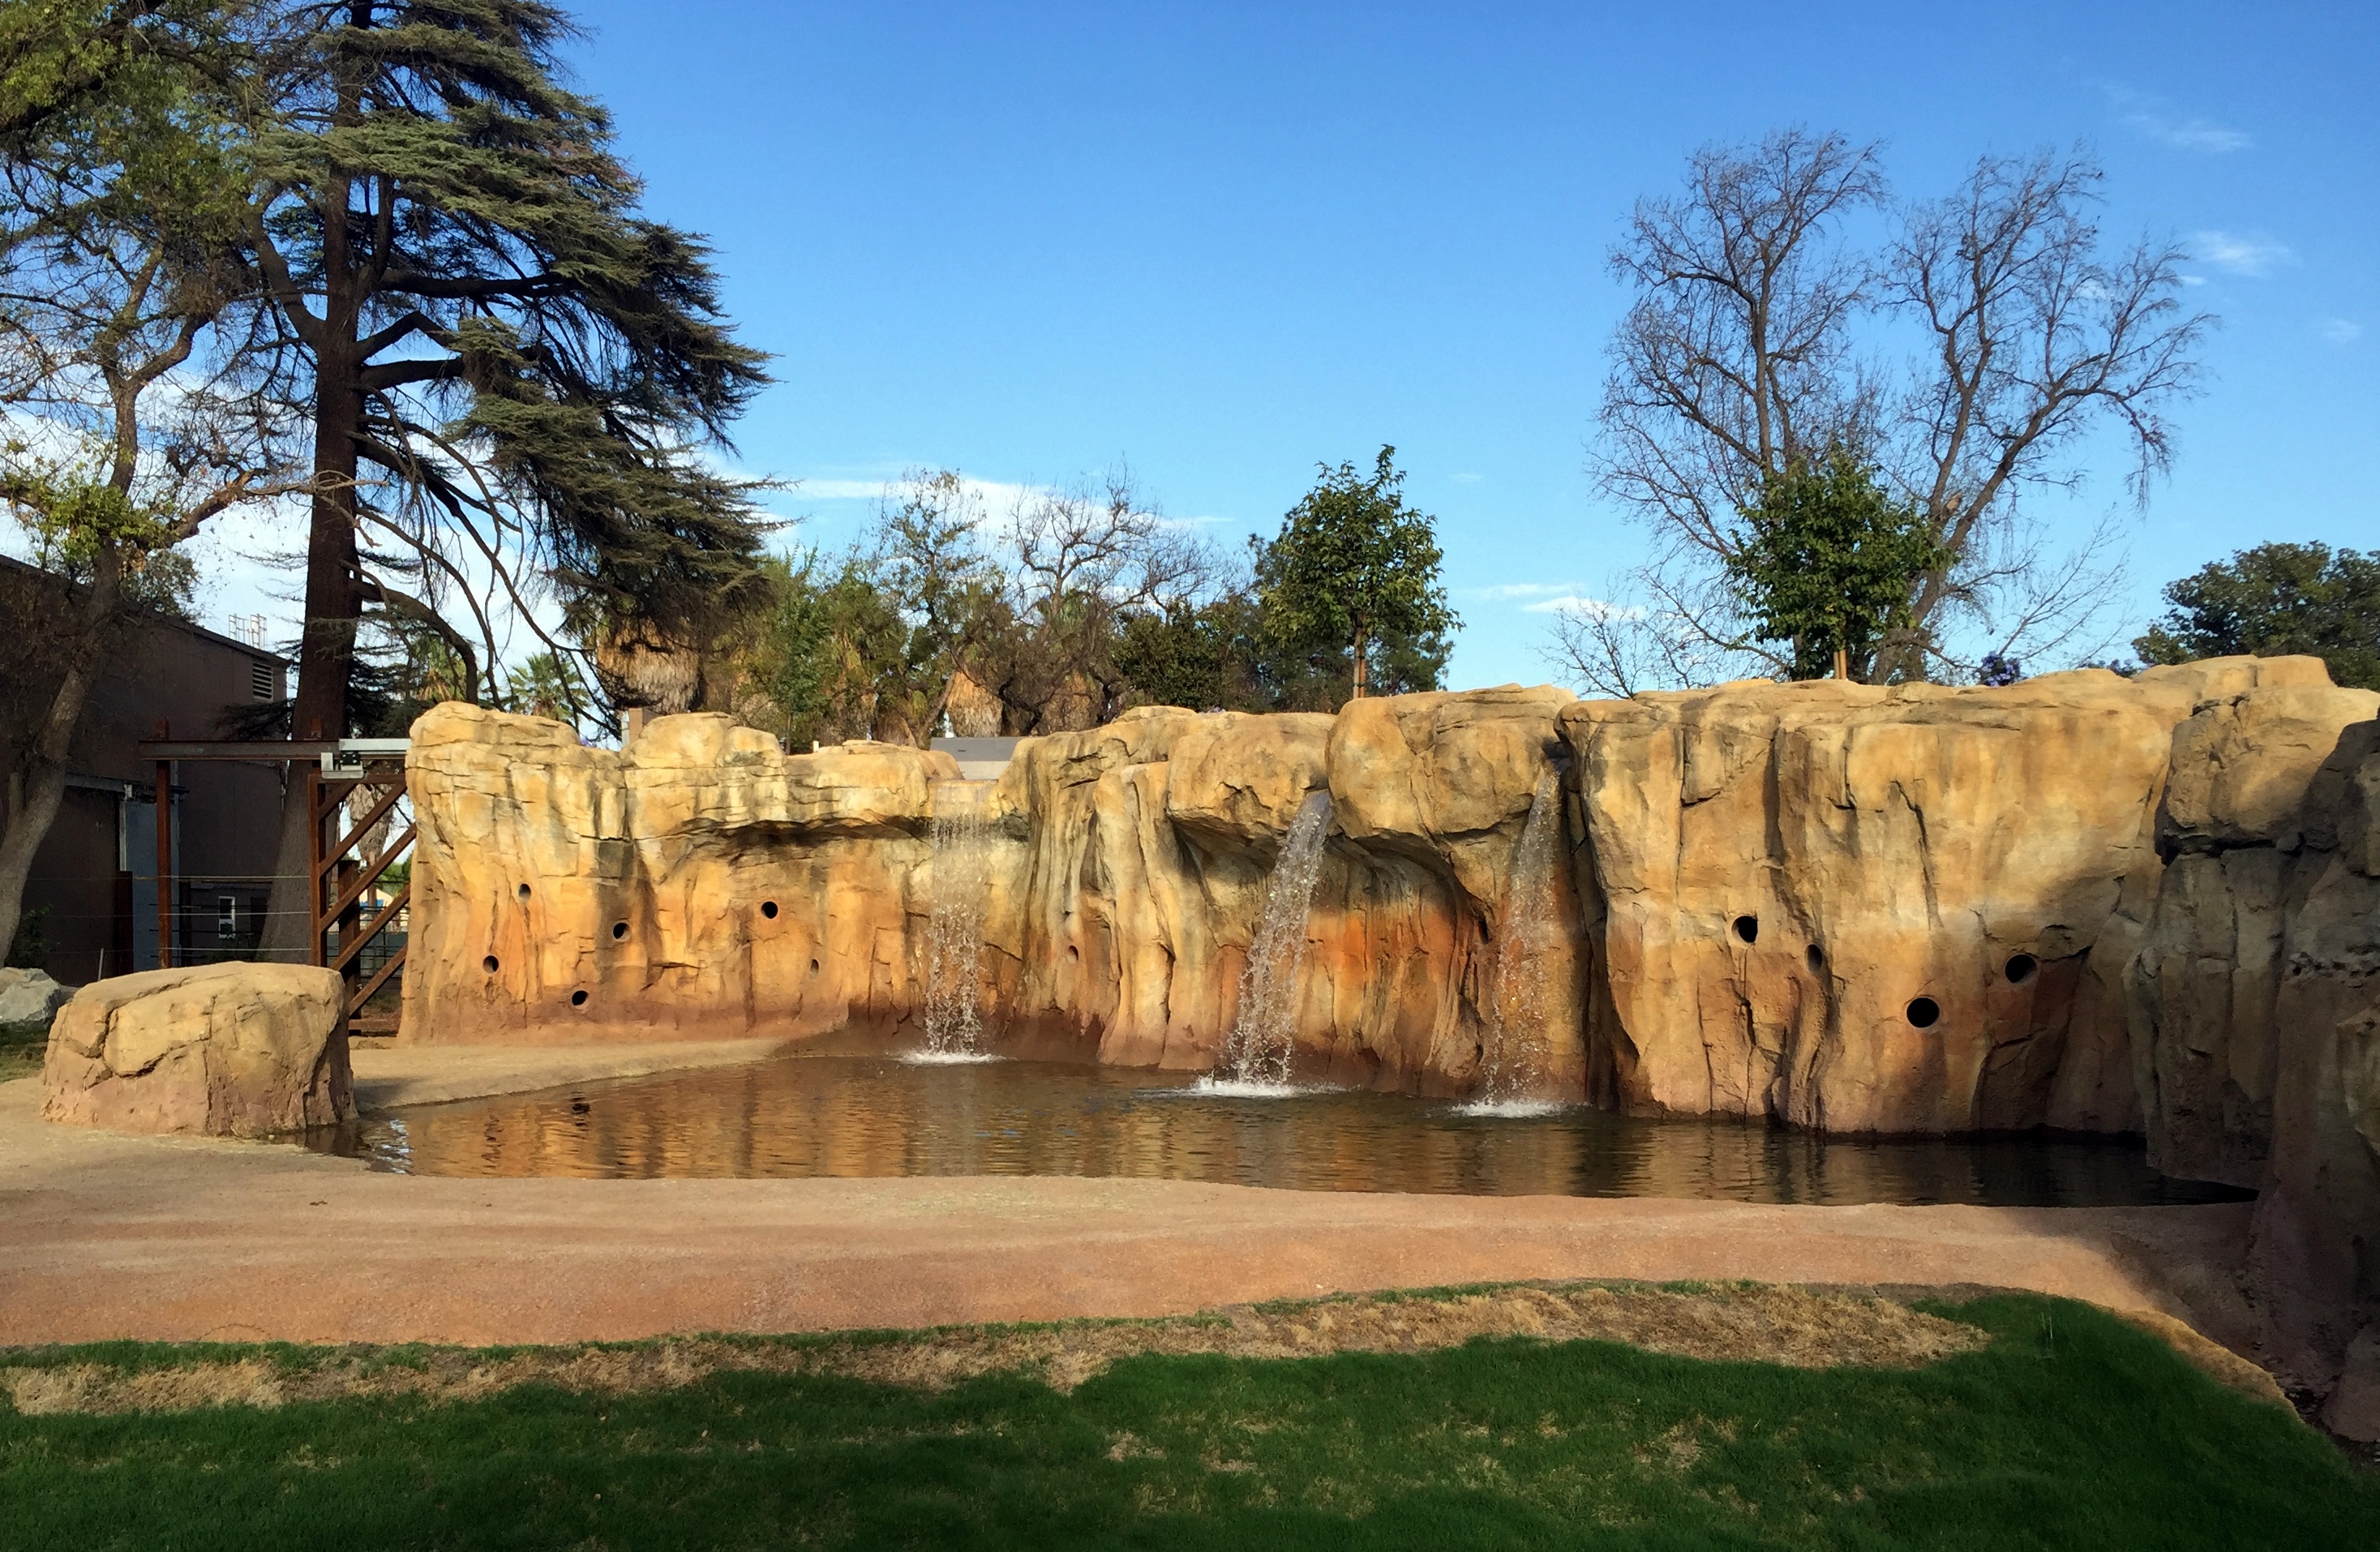 The elephant's fountain, with holes where keepers can put treats as an enrichment activity for the elephants